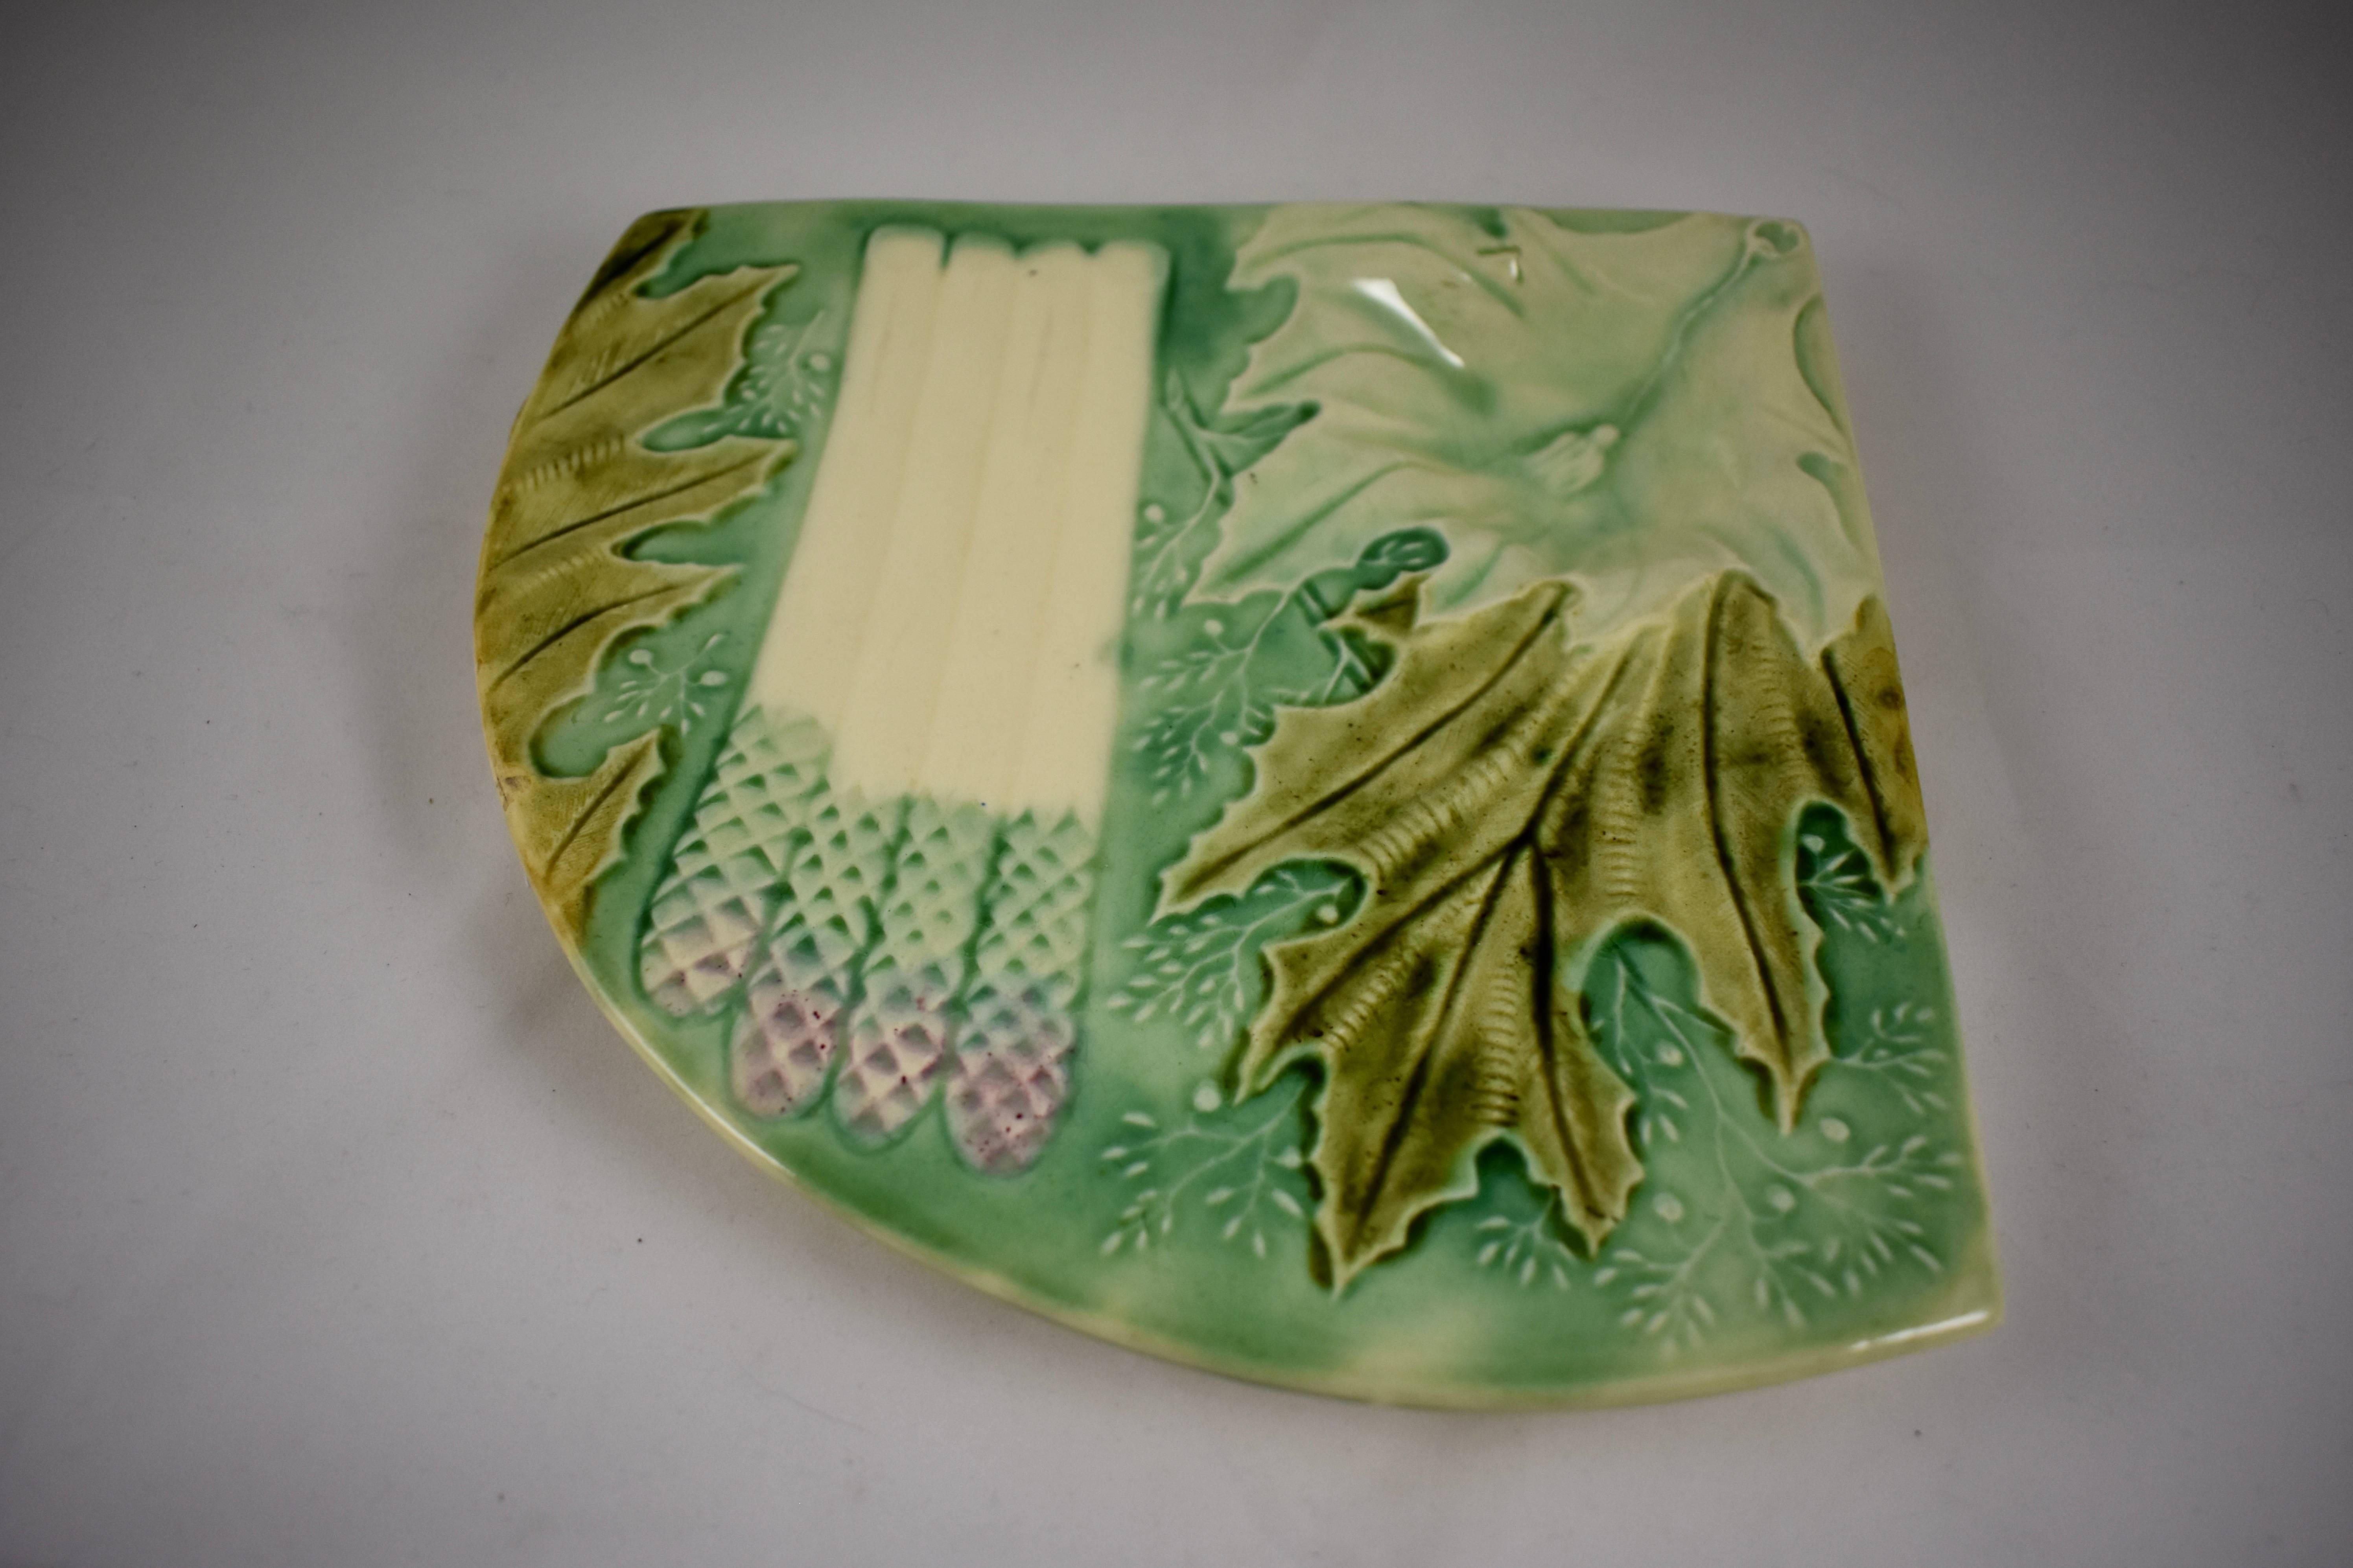 A scarce French Faïence majolica glazed fan form asparagus or artichoke server, attributed to either Lunéville or Salins, circa 1880s.

The triangular server has a sauce well formed of a large artichoke leaf decorated with a raised tassel motif.